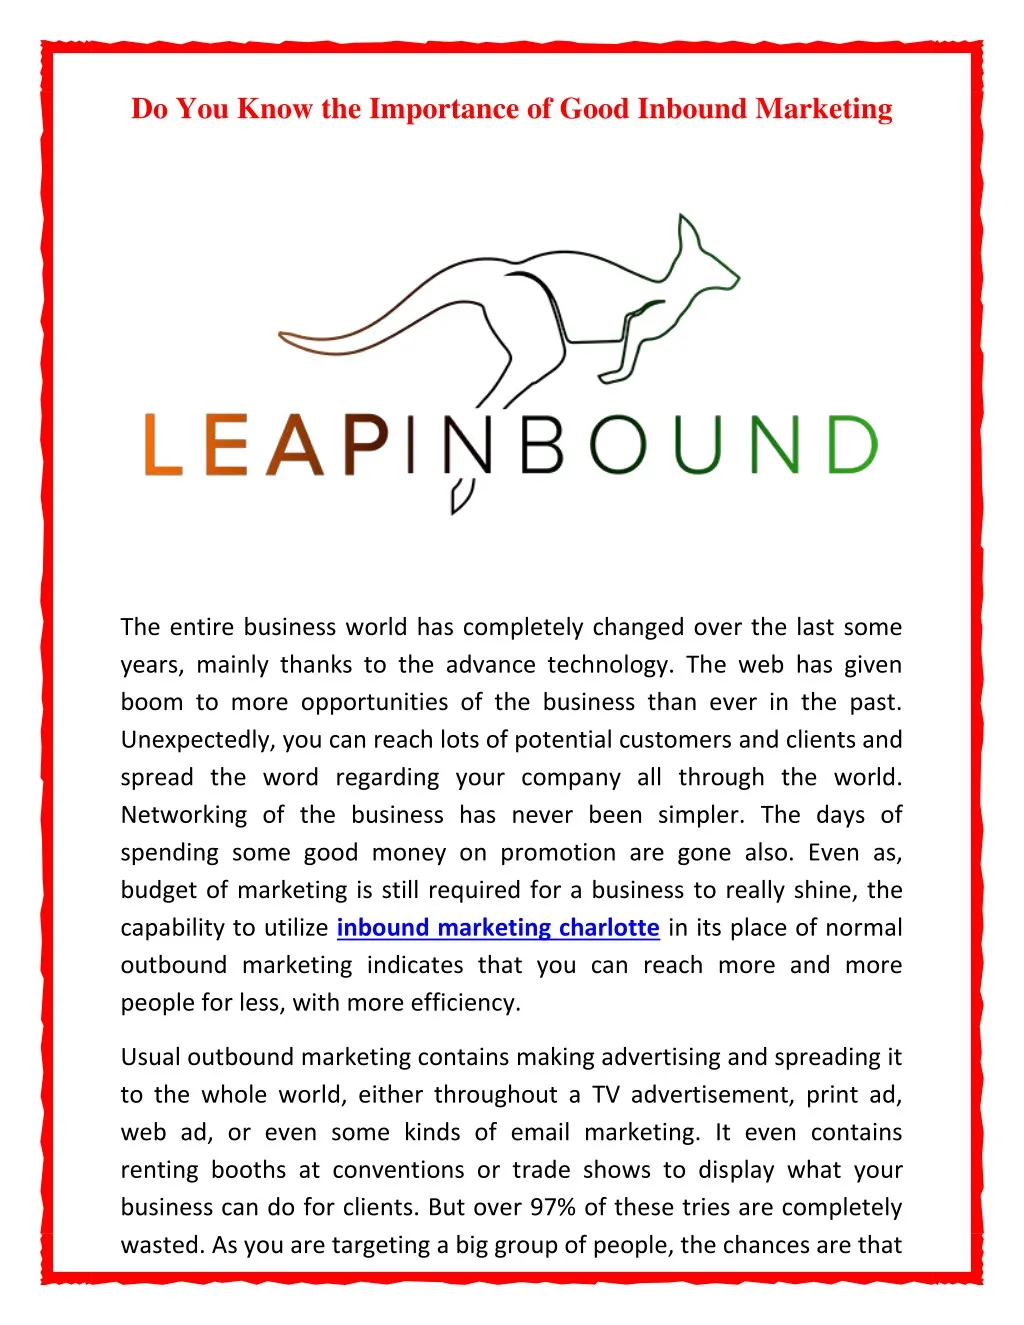 do you know the importance of good inbound